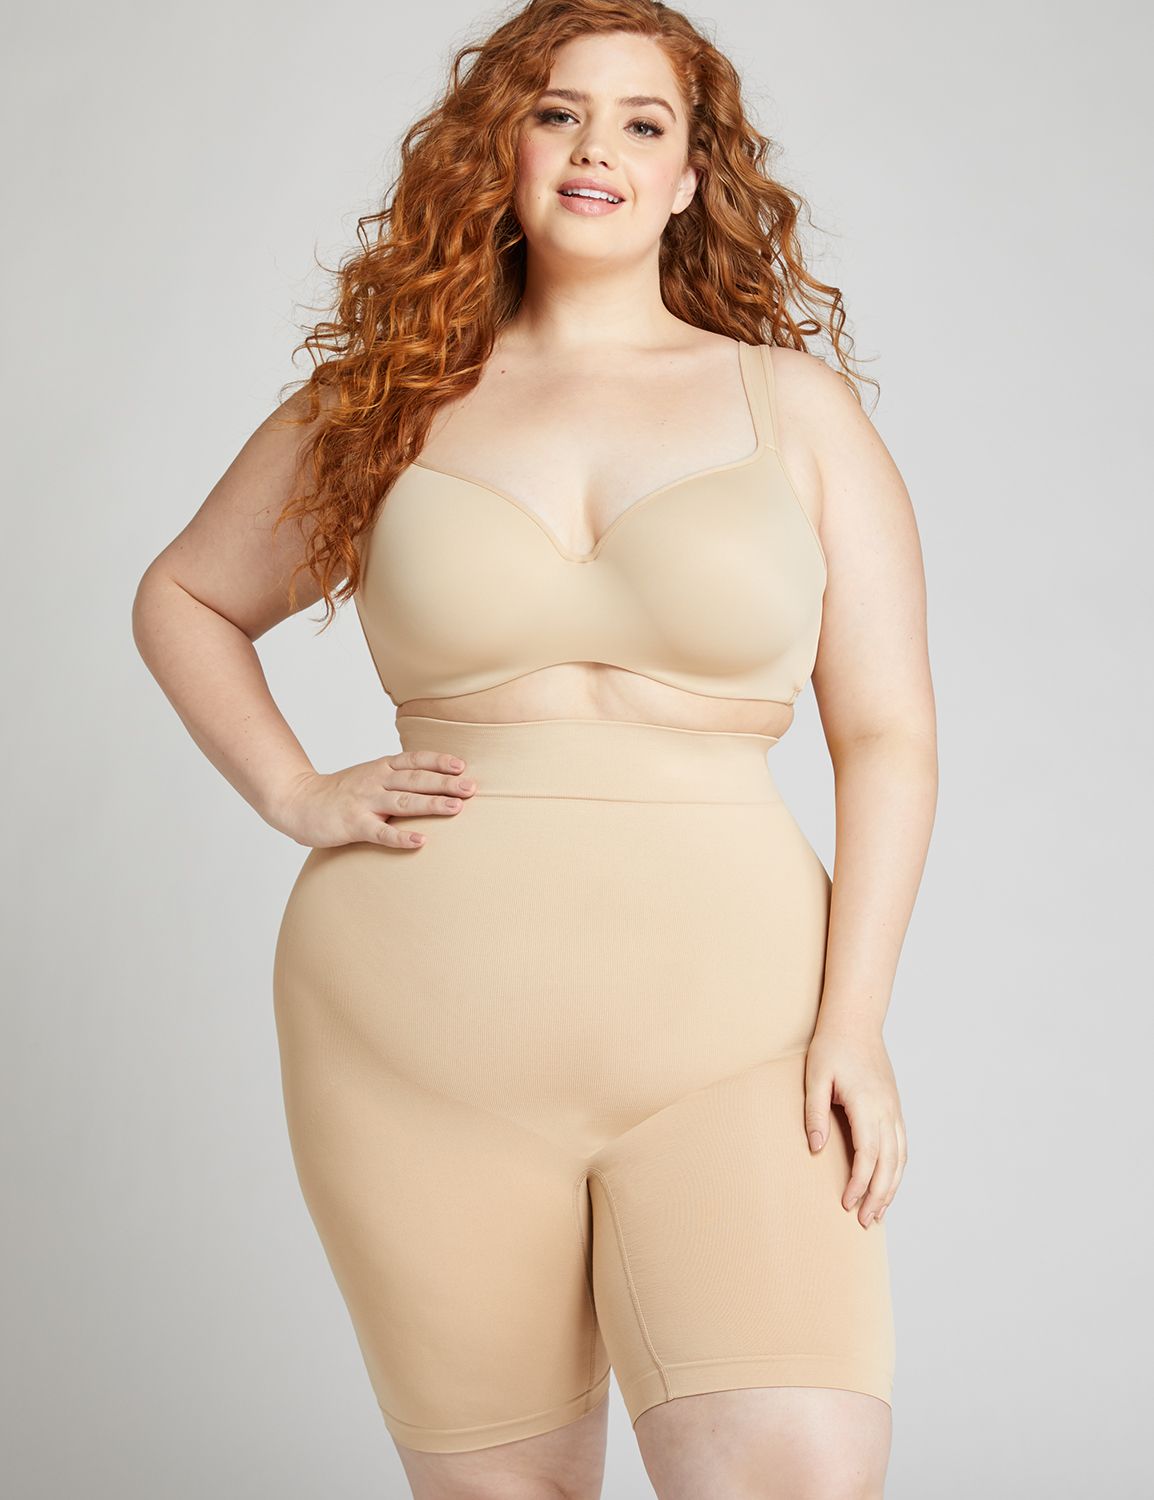 Lane Bryant introduces mannequins with diverse body types and skin